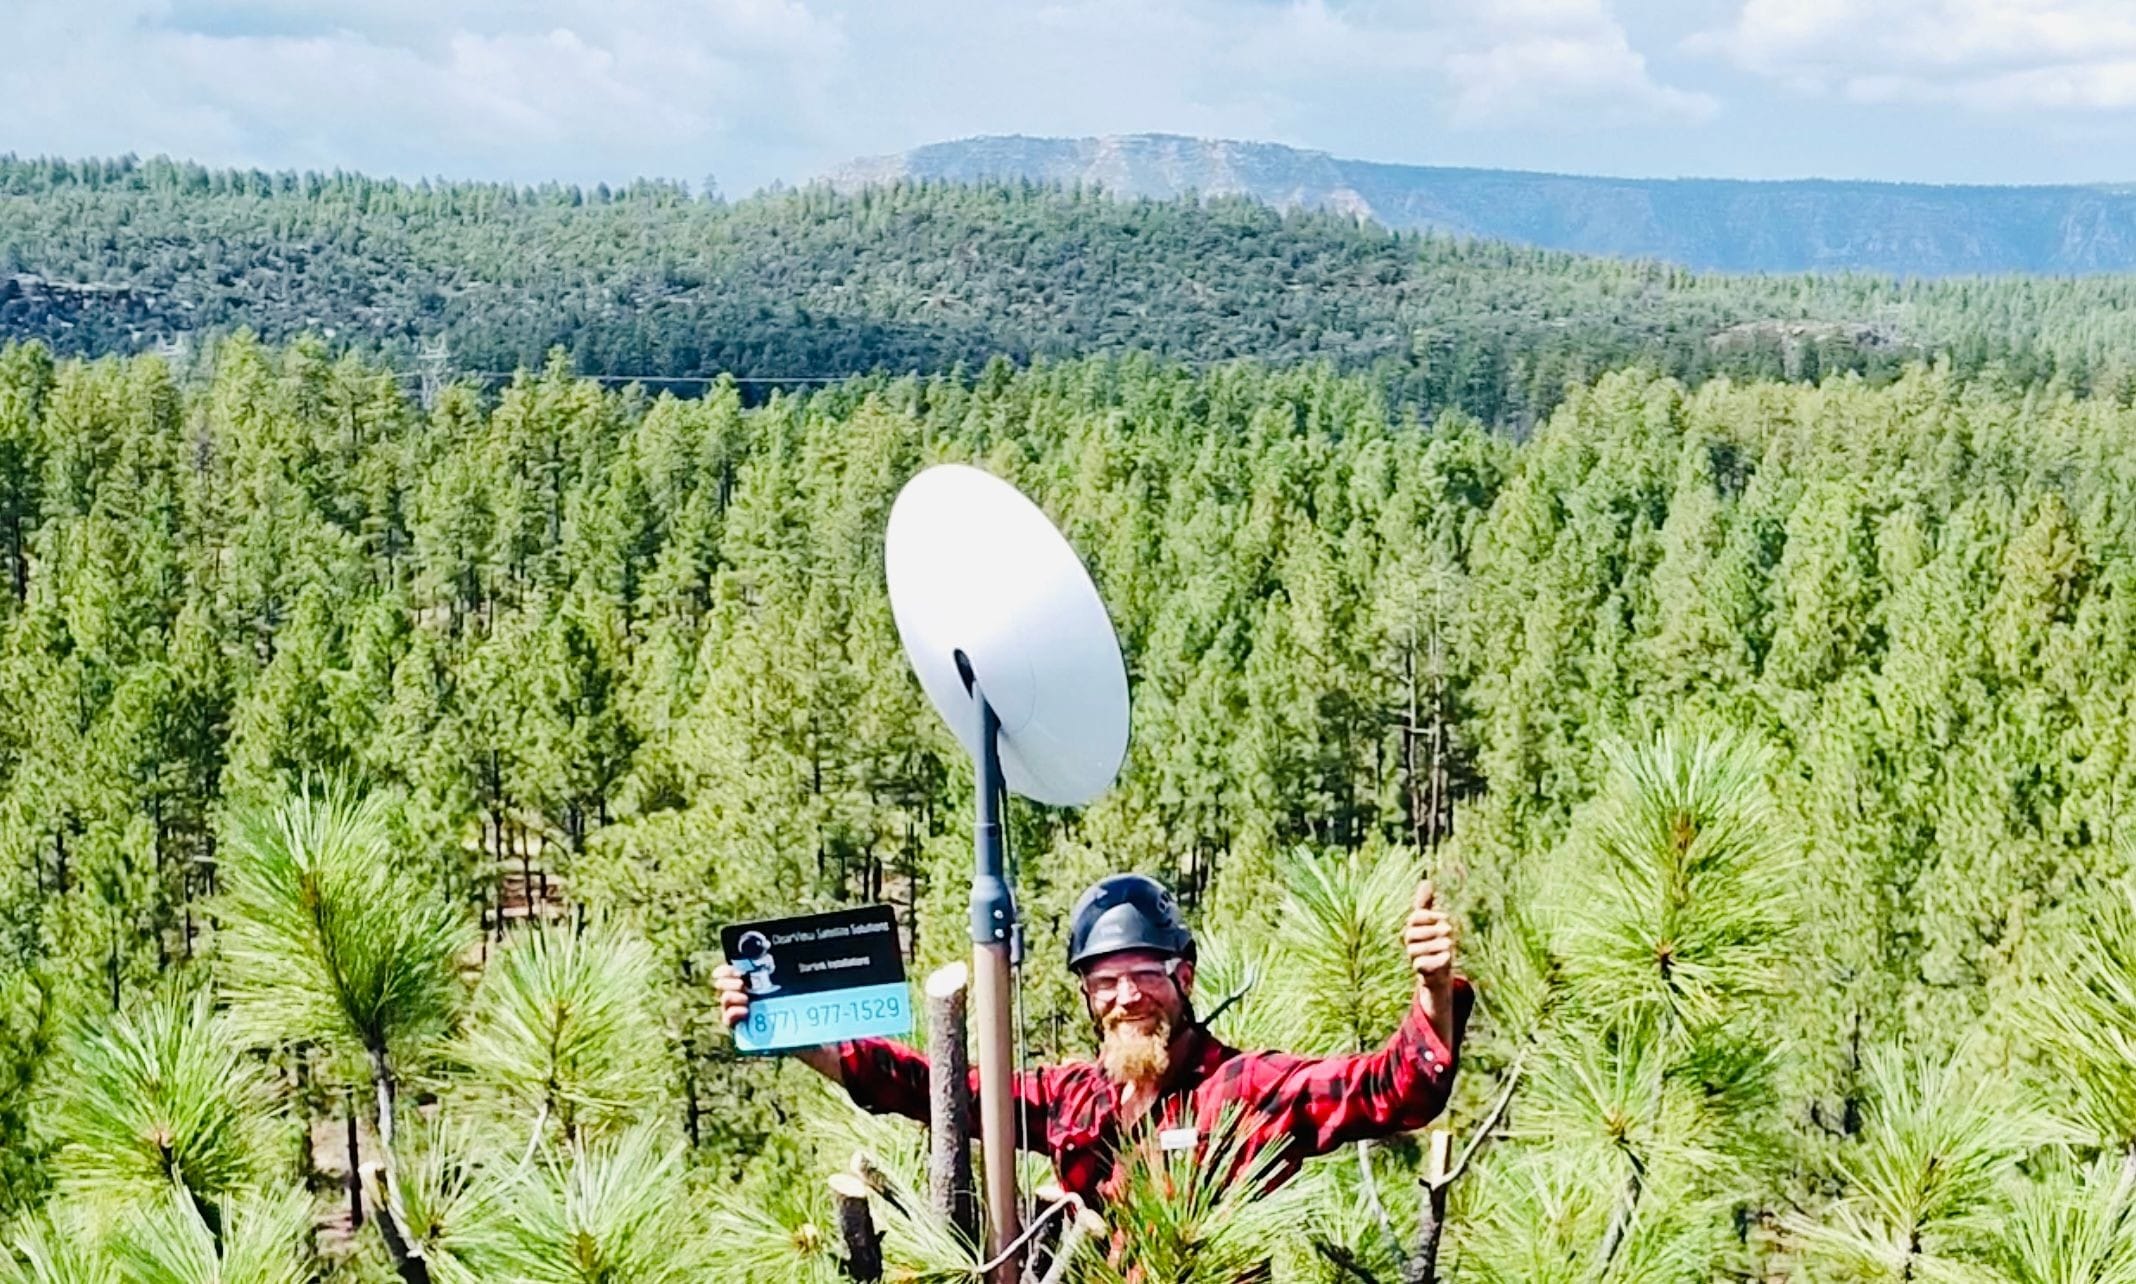 Our certified arborists will install your Starlink dish to provide a clear view.